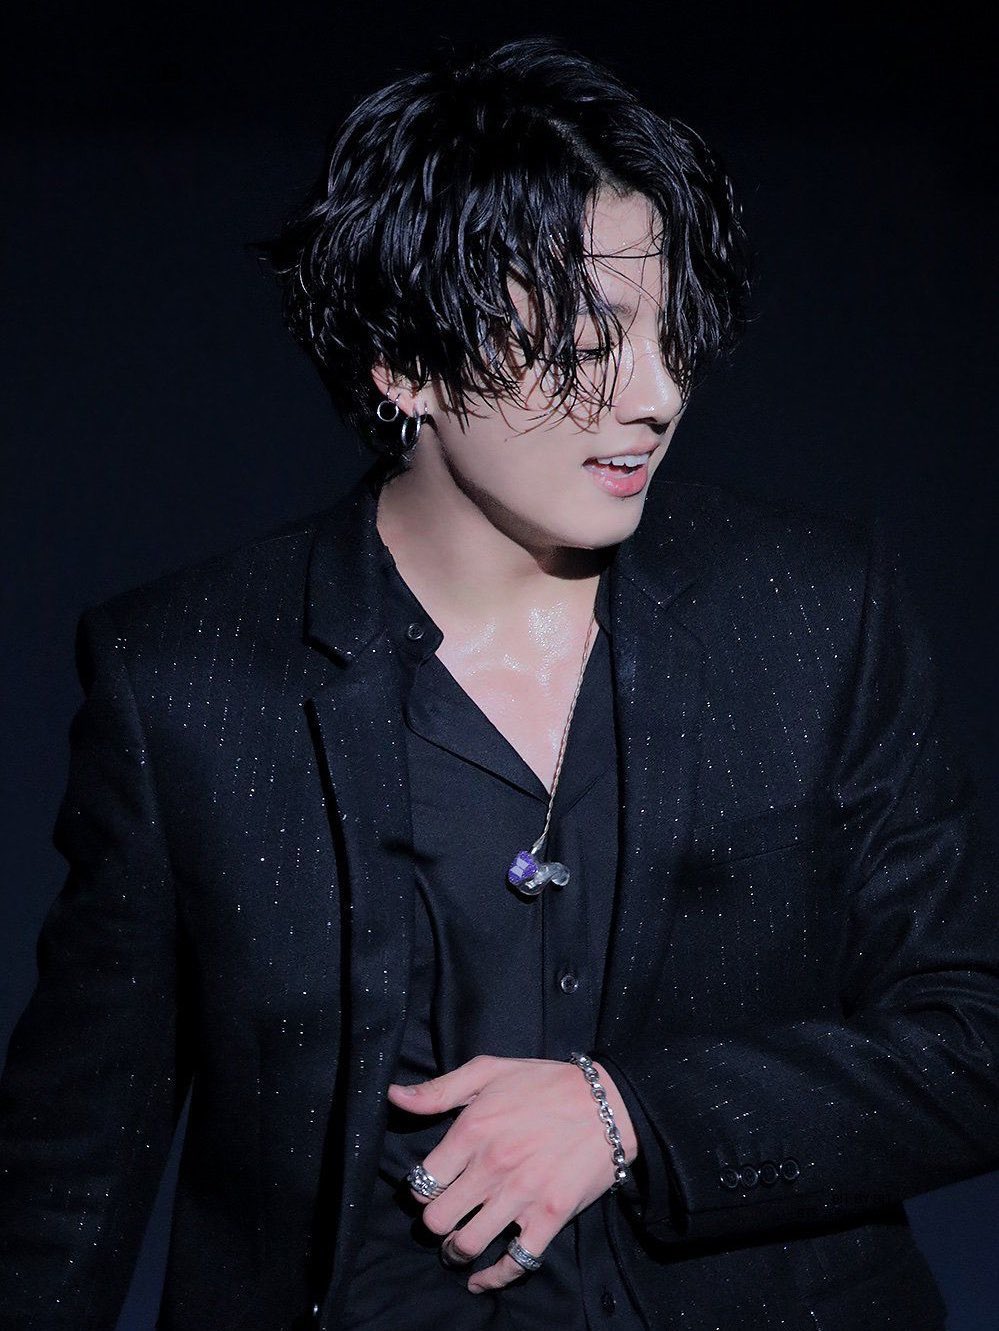 jungkook admirer₇ on X: the starry suit + wet hair combo >>